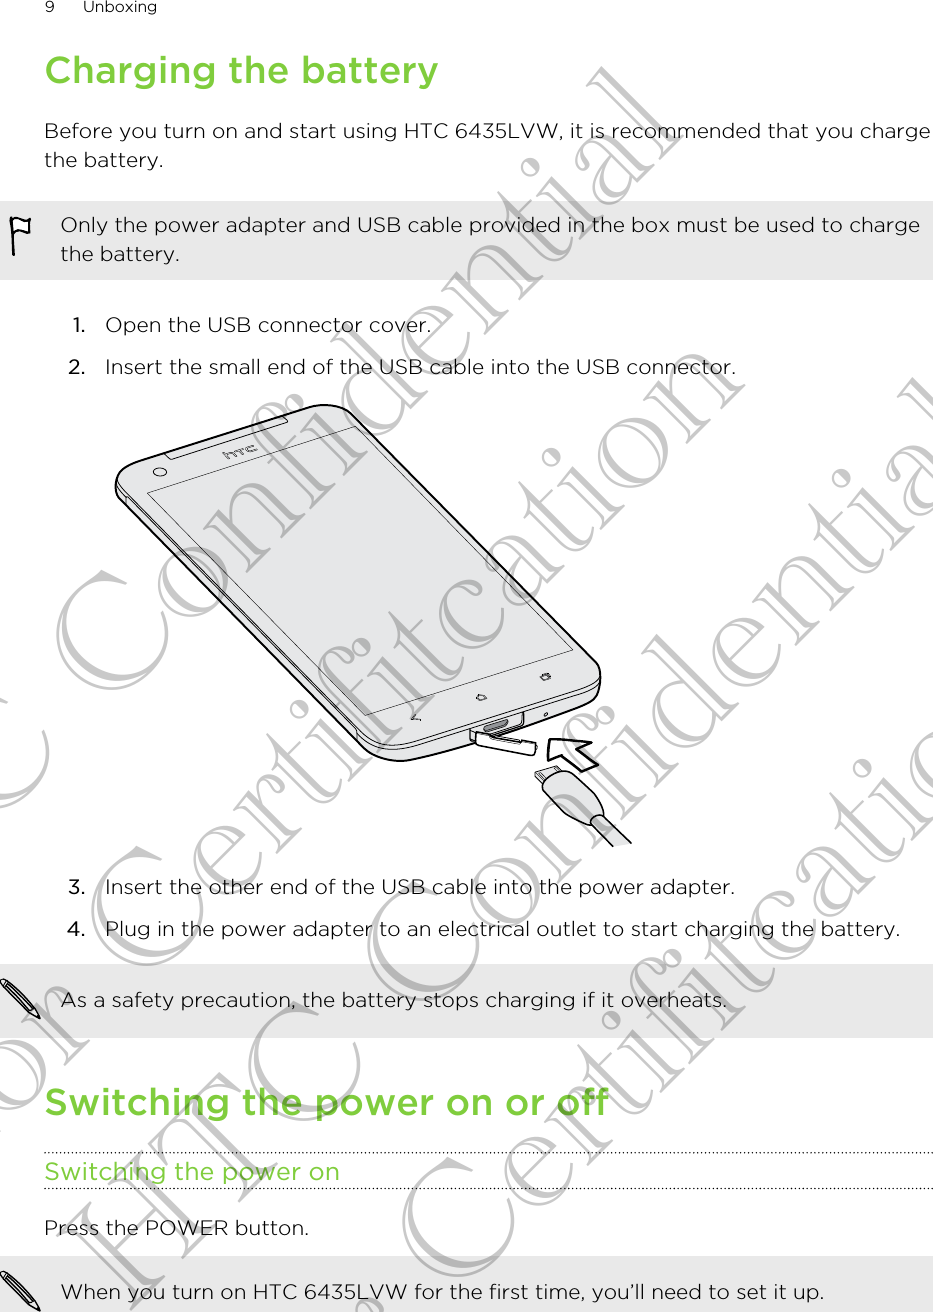 Charging the batteryBefore you turn on and start using HTC 6435LVW, it is recommended that you chargethe battery.Only the power adapter and USB cable provided in the box must be used to chargethe battery.1. Open the USB connector cover.2. Insert the small end of the USB cable into the USB connector. 3. Insert the other end of the USB cable into the power adapter.4. Plug in the power adapter to an electrical outlet to start charging the battery.As a safety precaution, the battery stops charging if it overheats.Switching the power on or offSwitching the power onPress the POWER button. When you turn on HTC 6435LVW for the first time, you’ll need to set it up.9 UnboxingHTC Confidential for Certifitcation HTC Confidential for Certifitcation